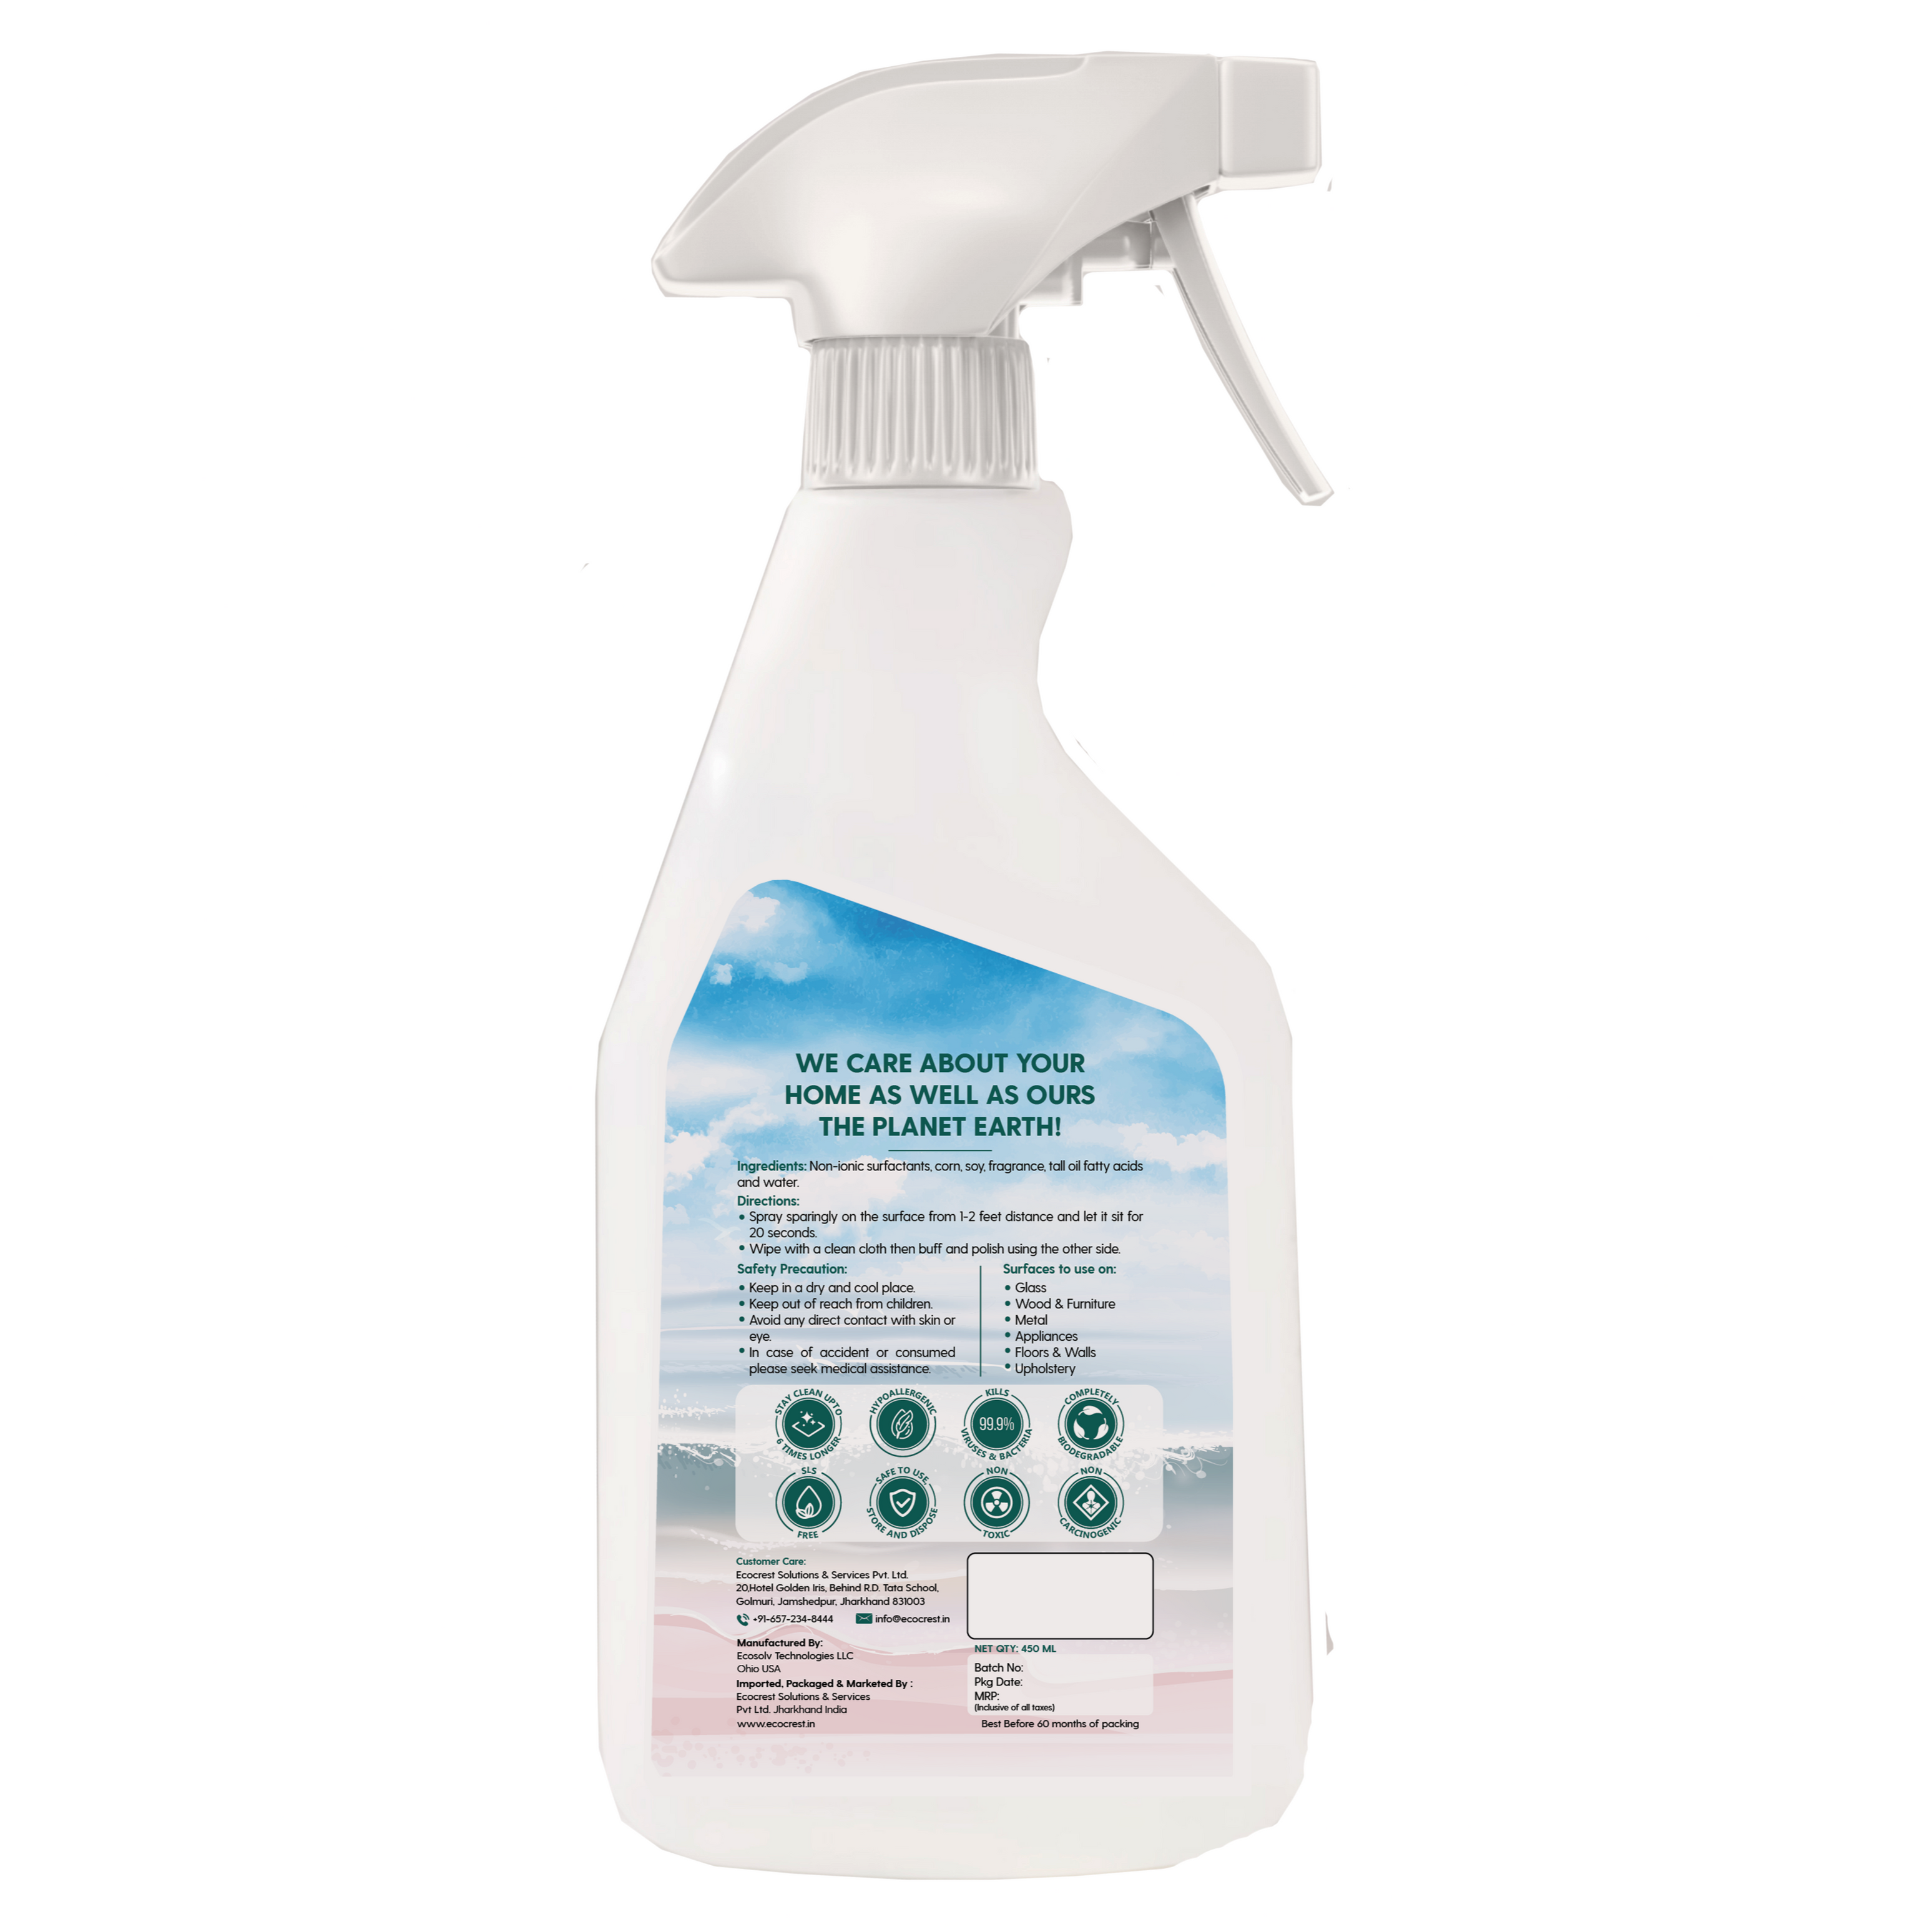 ALL SURFACE CLEANER